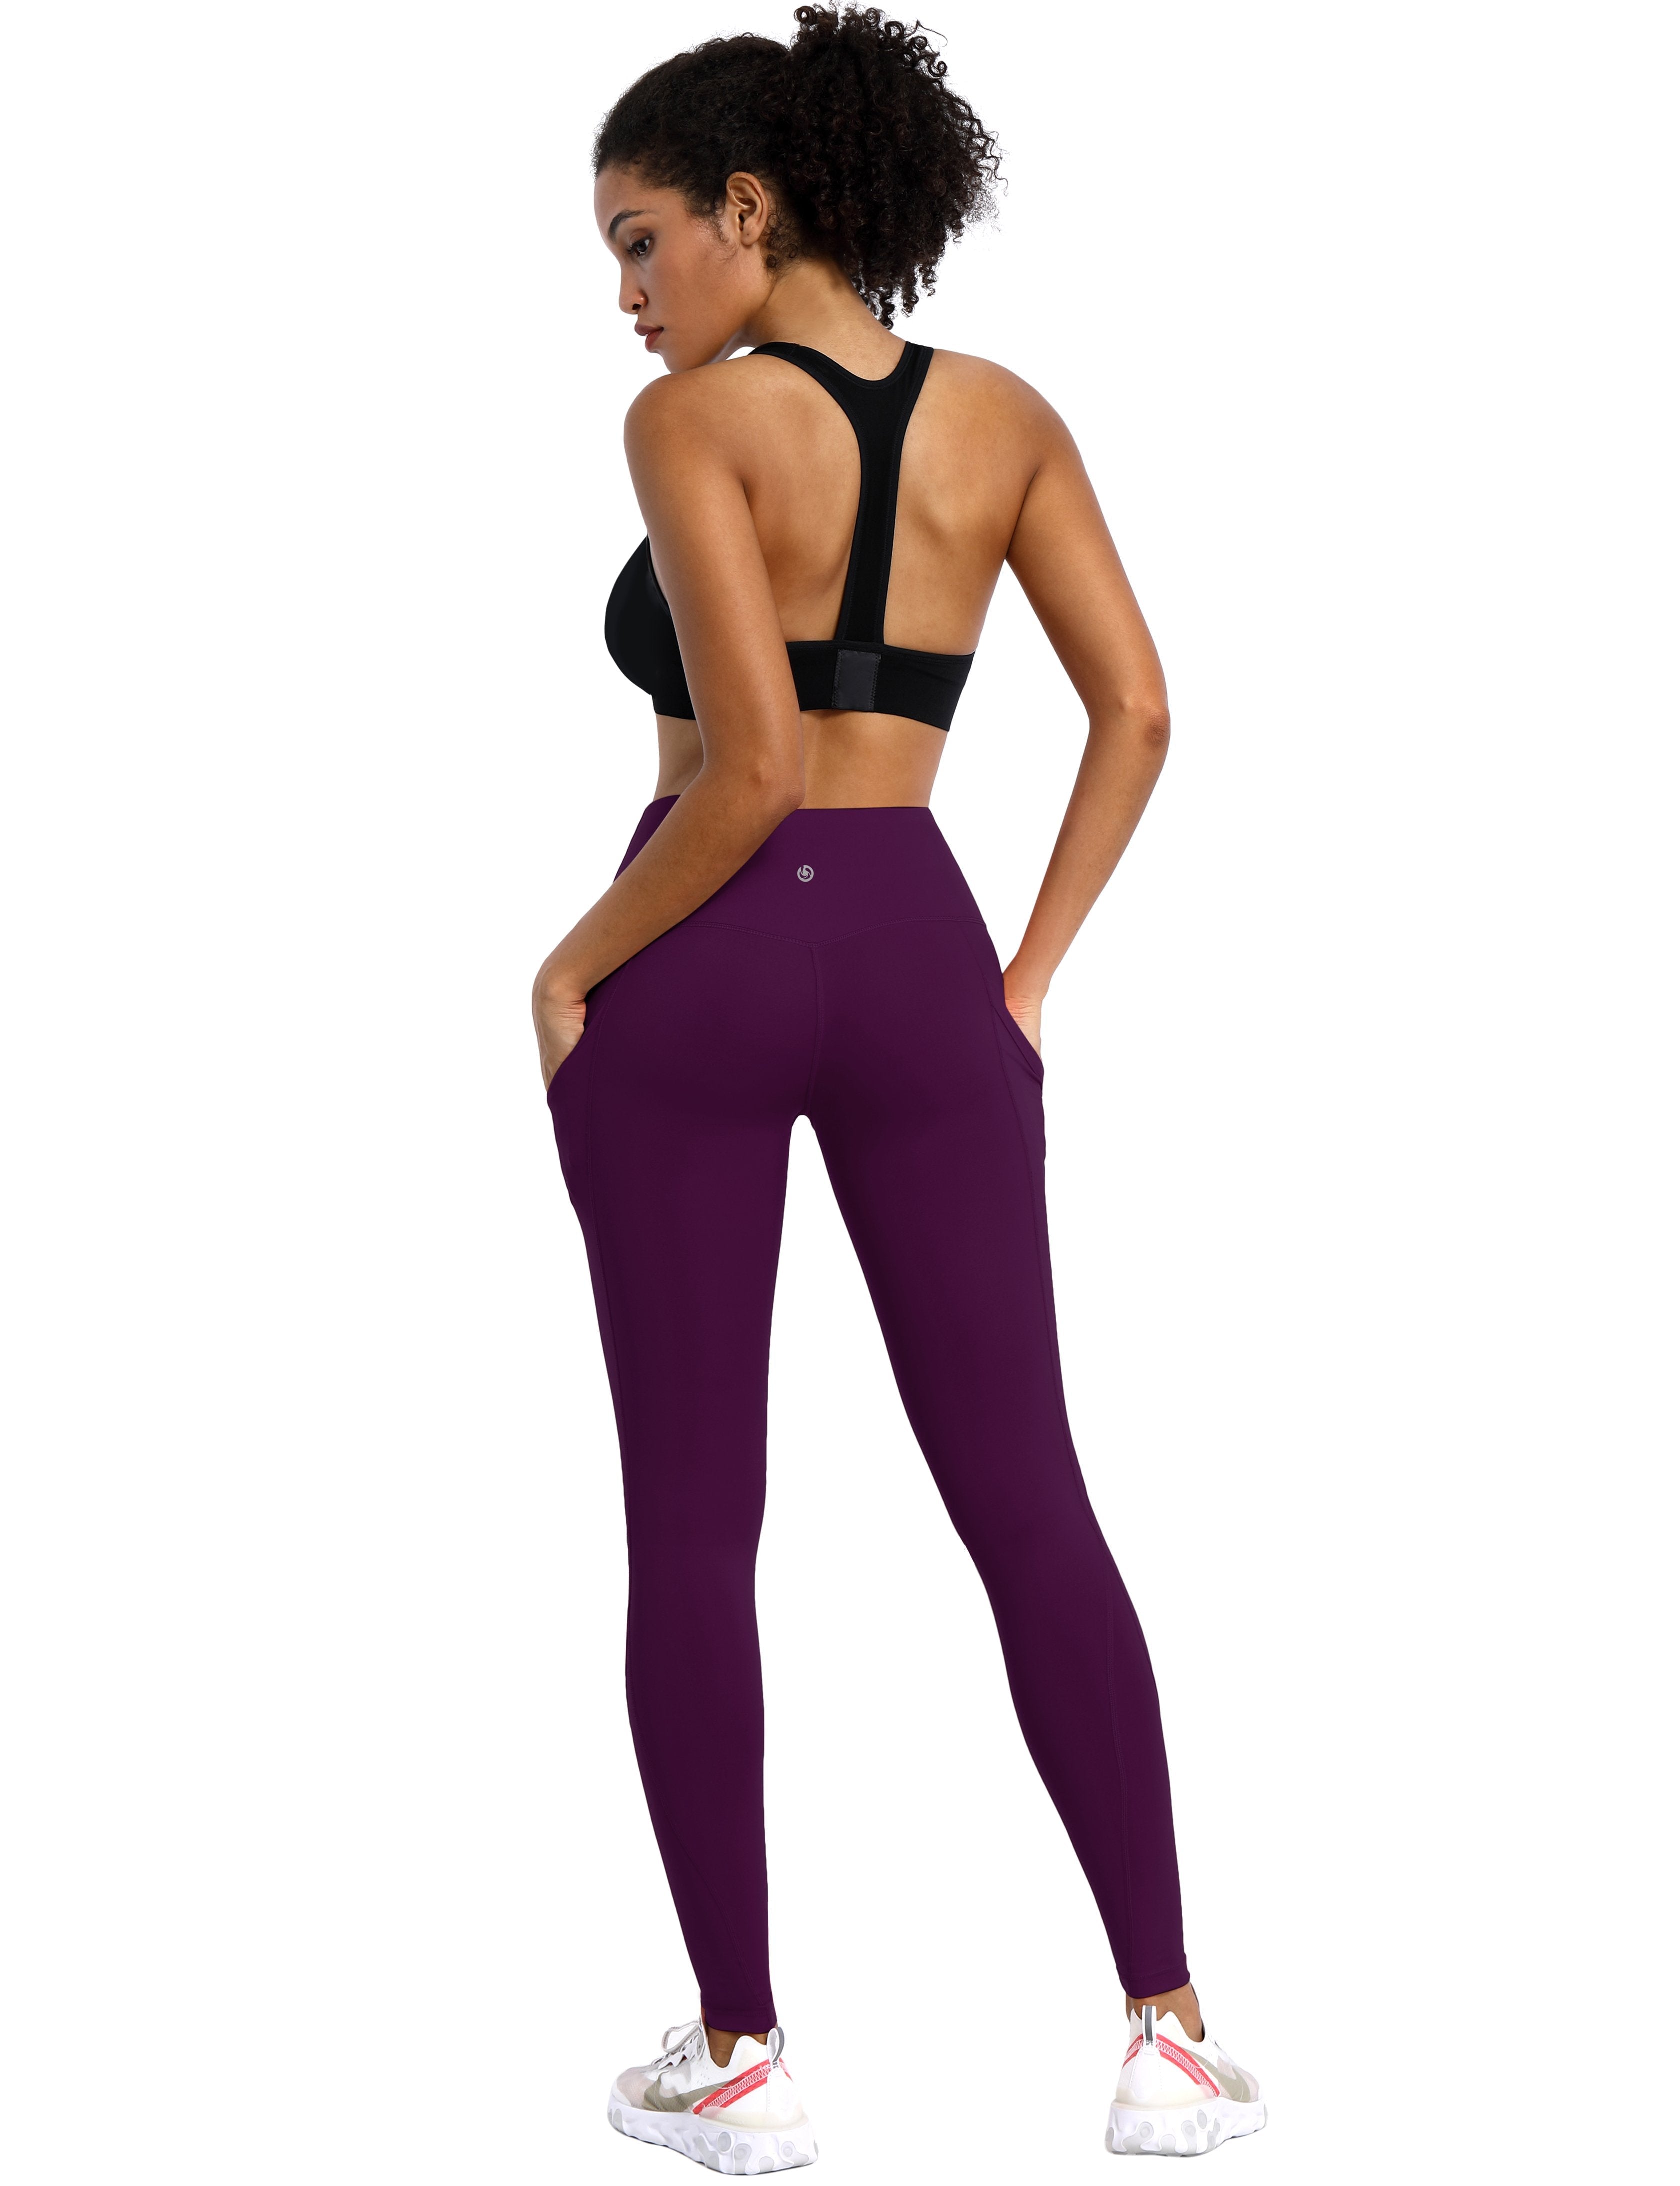 High Waist Side Pockets Tall Size Pants plum 75% Nylon, 25% Spandex Fabric doesn't attract lint easily 4-way stretch No see-through Moisture-wicking Tummy control Inner pocket